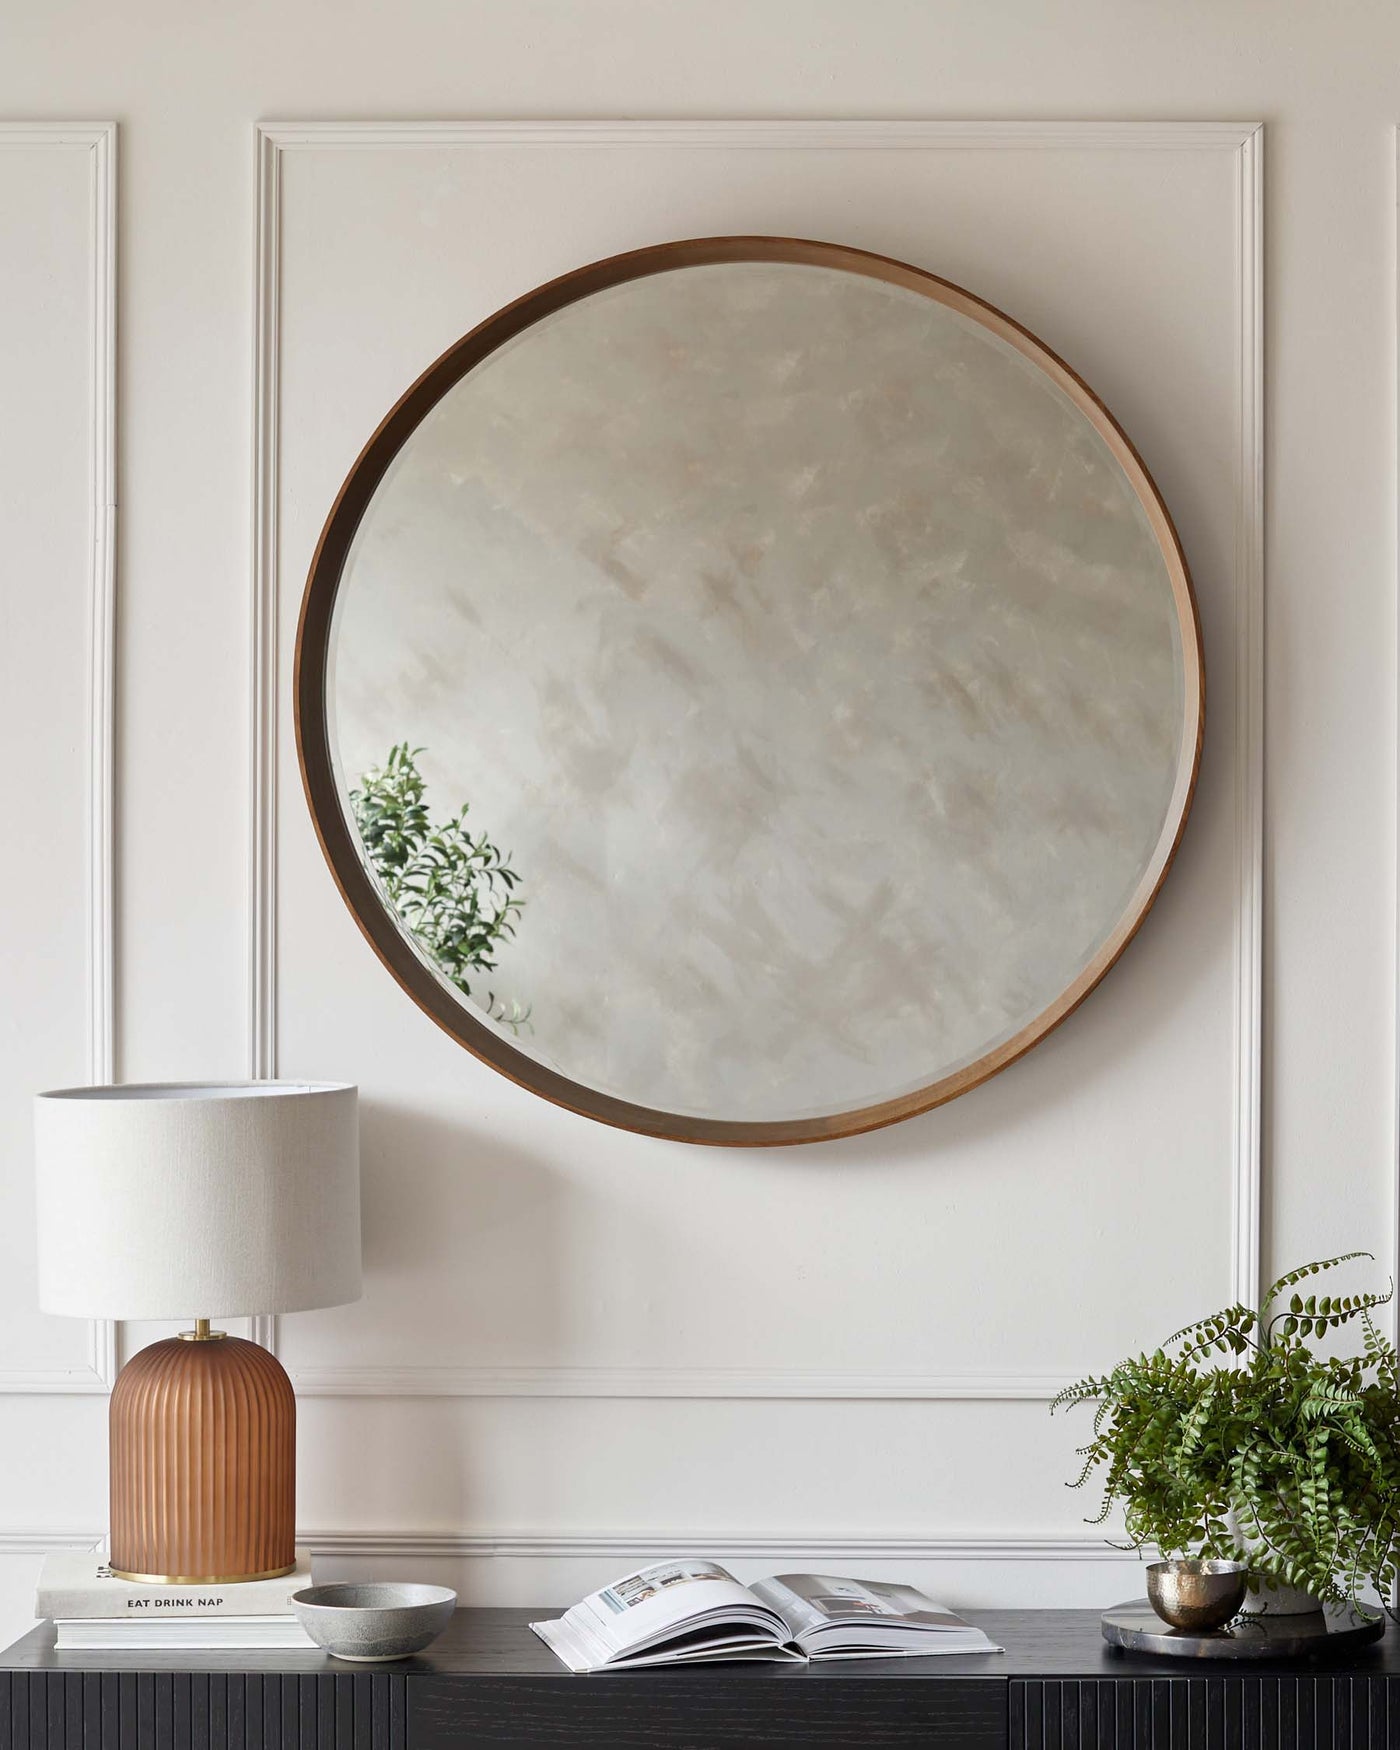 A modern ribbed table lamp with a cylindrical base in a copper finish topped with a white drum shade, placed on a sleek black sideboard with a horizontally ridged design. A potted fern adds a touch of greenery to the setup, accompanied by an open magazine for a casual, lived-in look. The ensemble is set against a neutral wall with classic panelling, complemented by a large round mirror with a subtle, warm-toned frame.